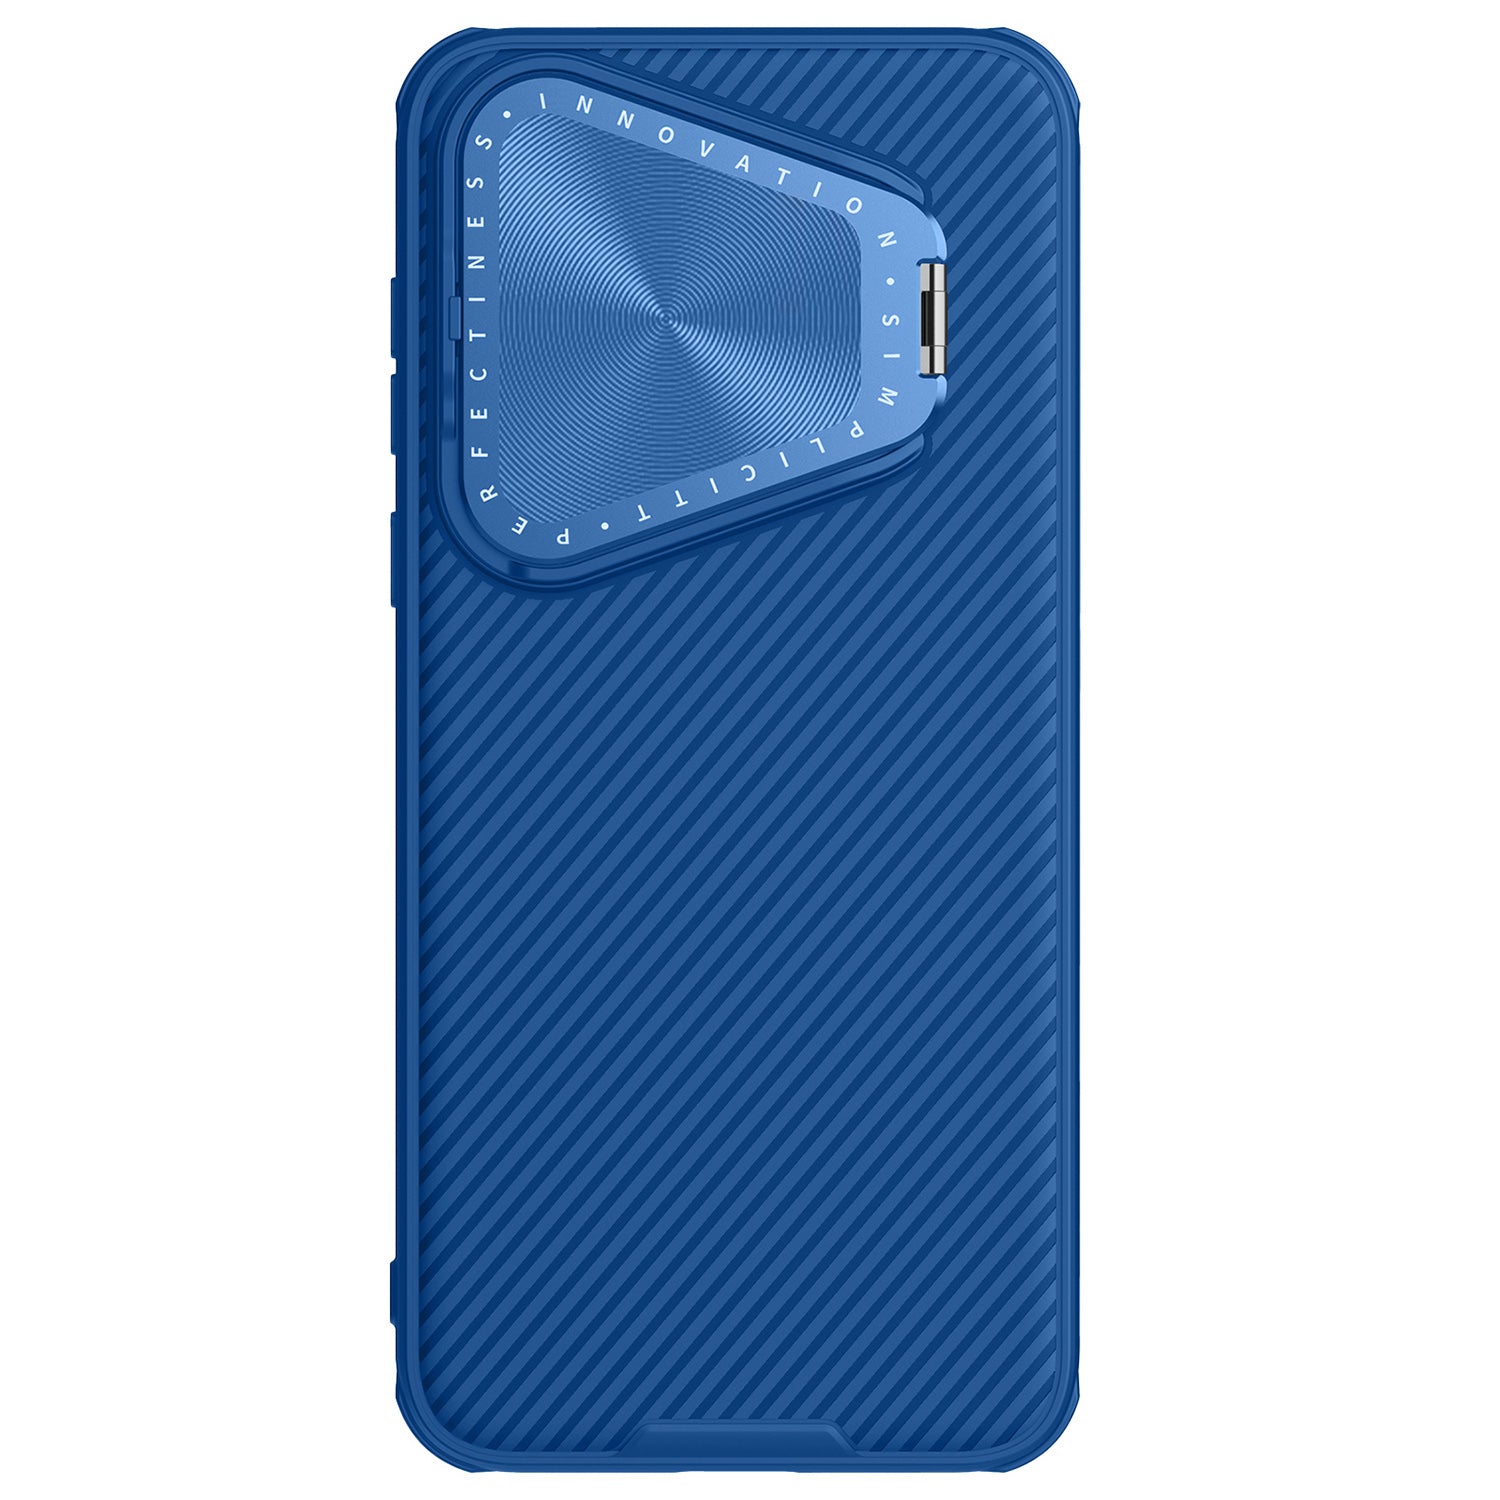 NILLKIN CamShield Prop Series for Huawei Pura 70 Pro / 70 Pro+ Case Lens Cover Kickstand PC + TPU Protector - Blue